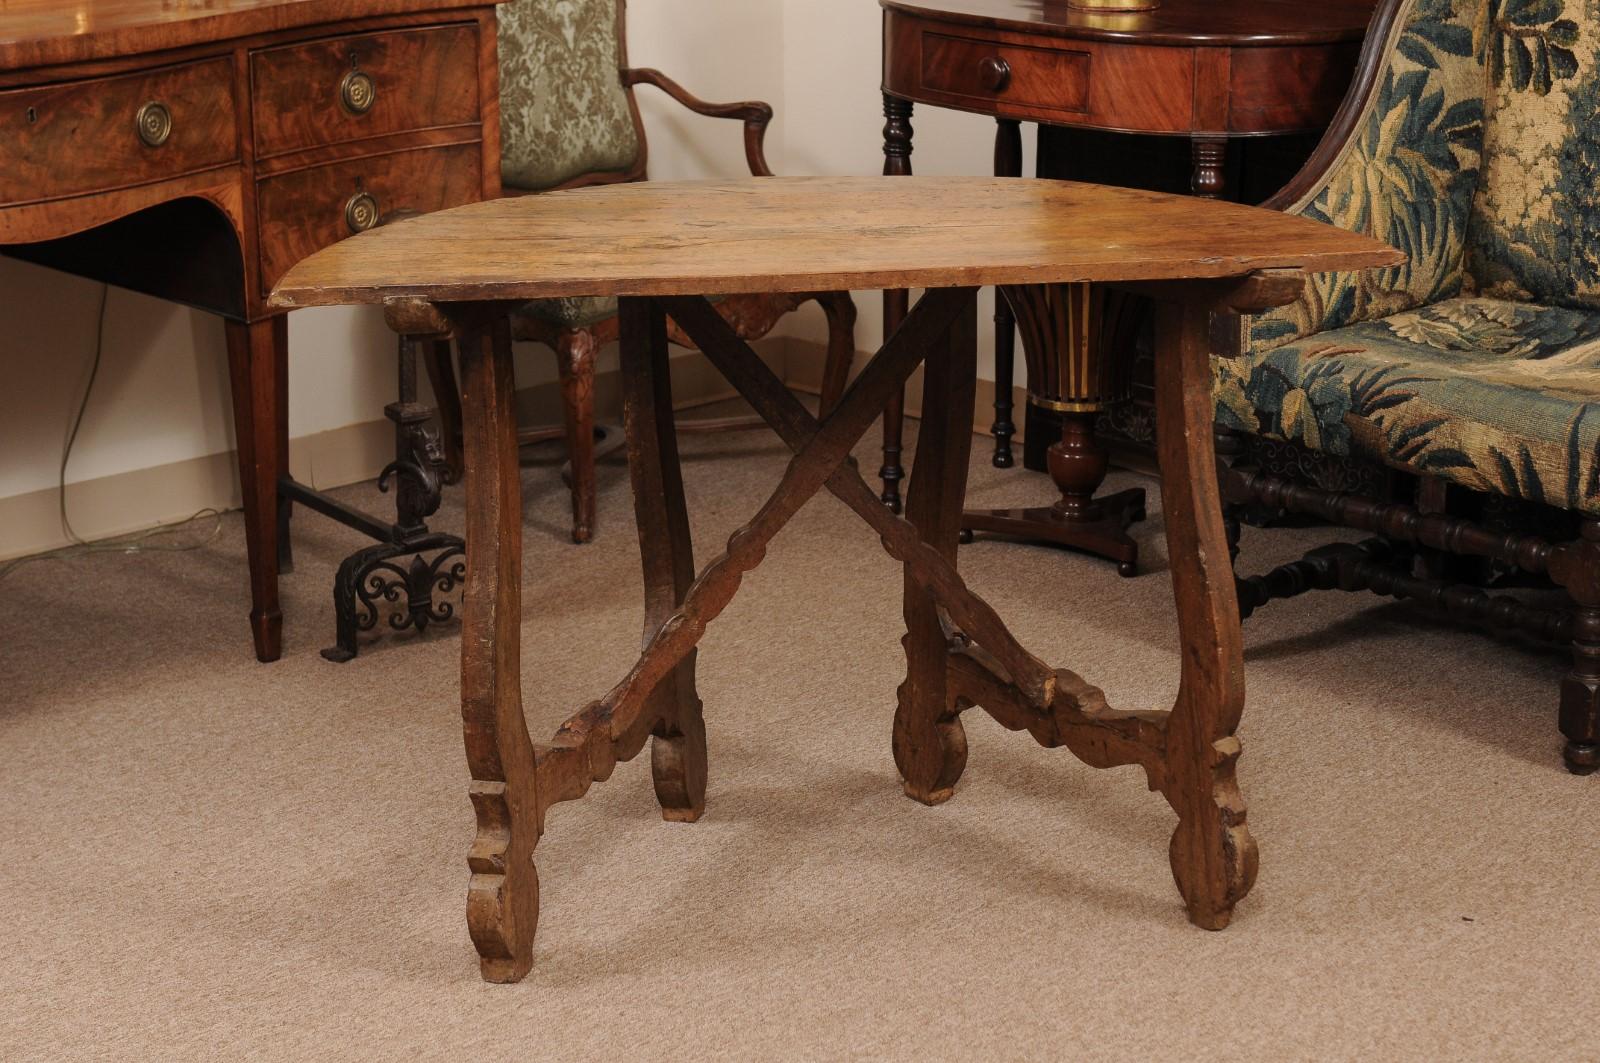 The Spanish walnut demilune table with lyre legs and x-form stretcher.

   